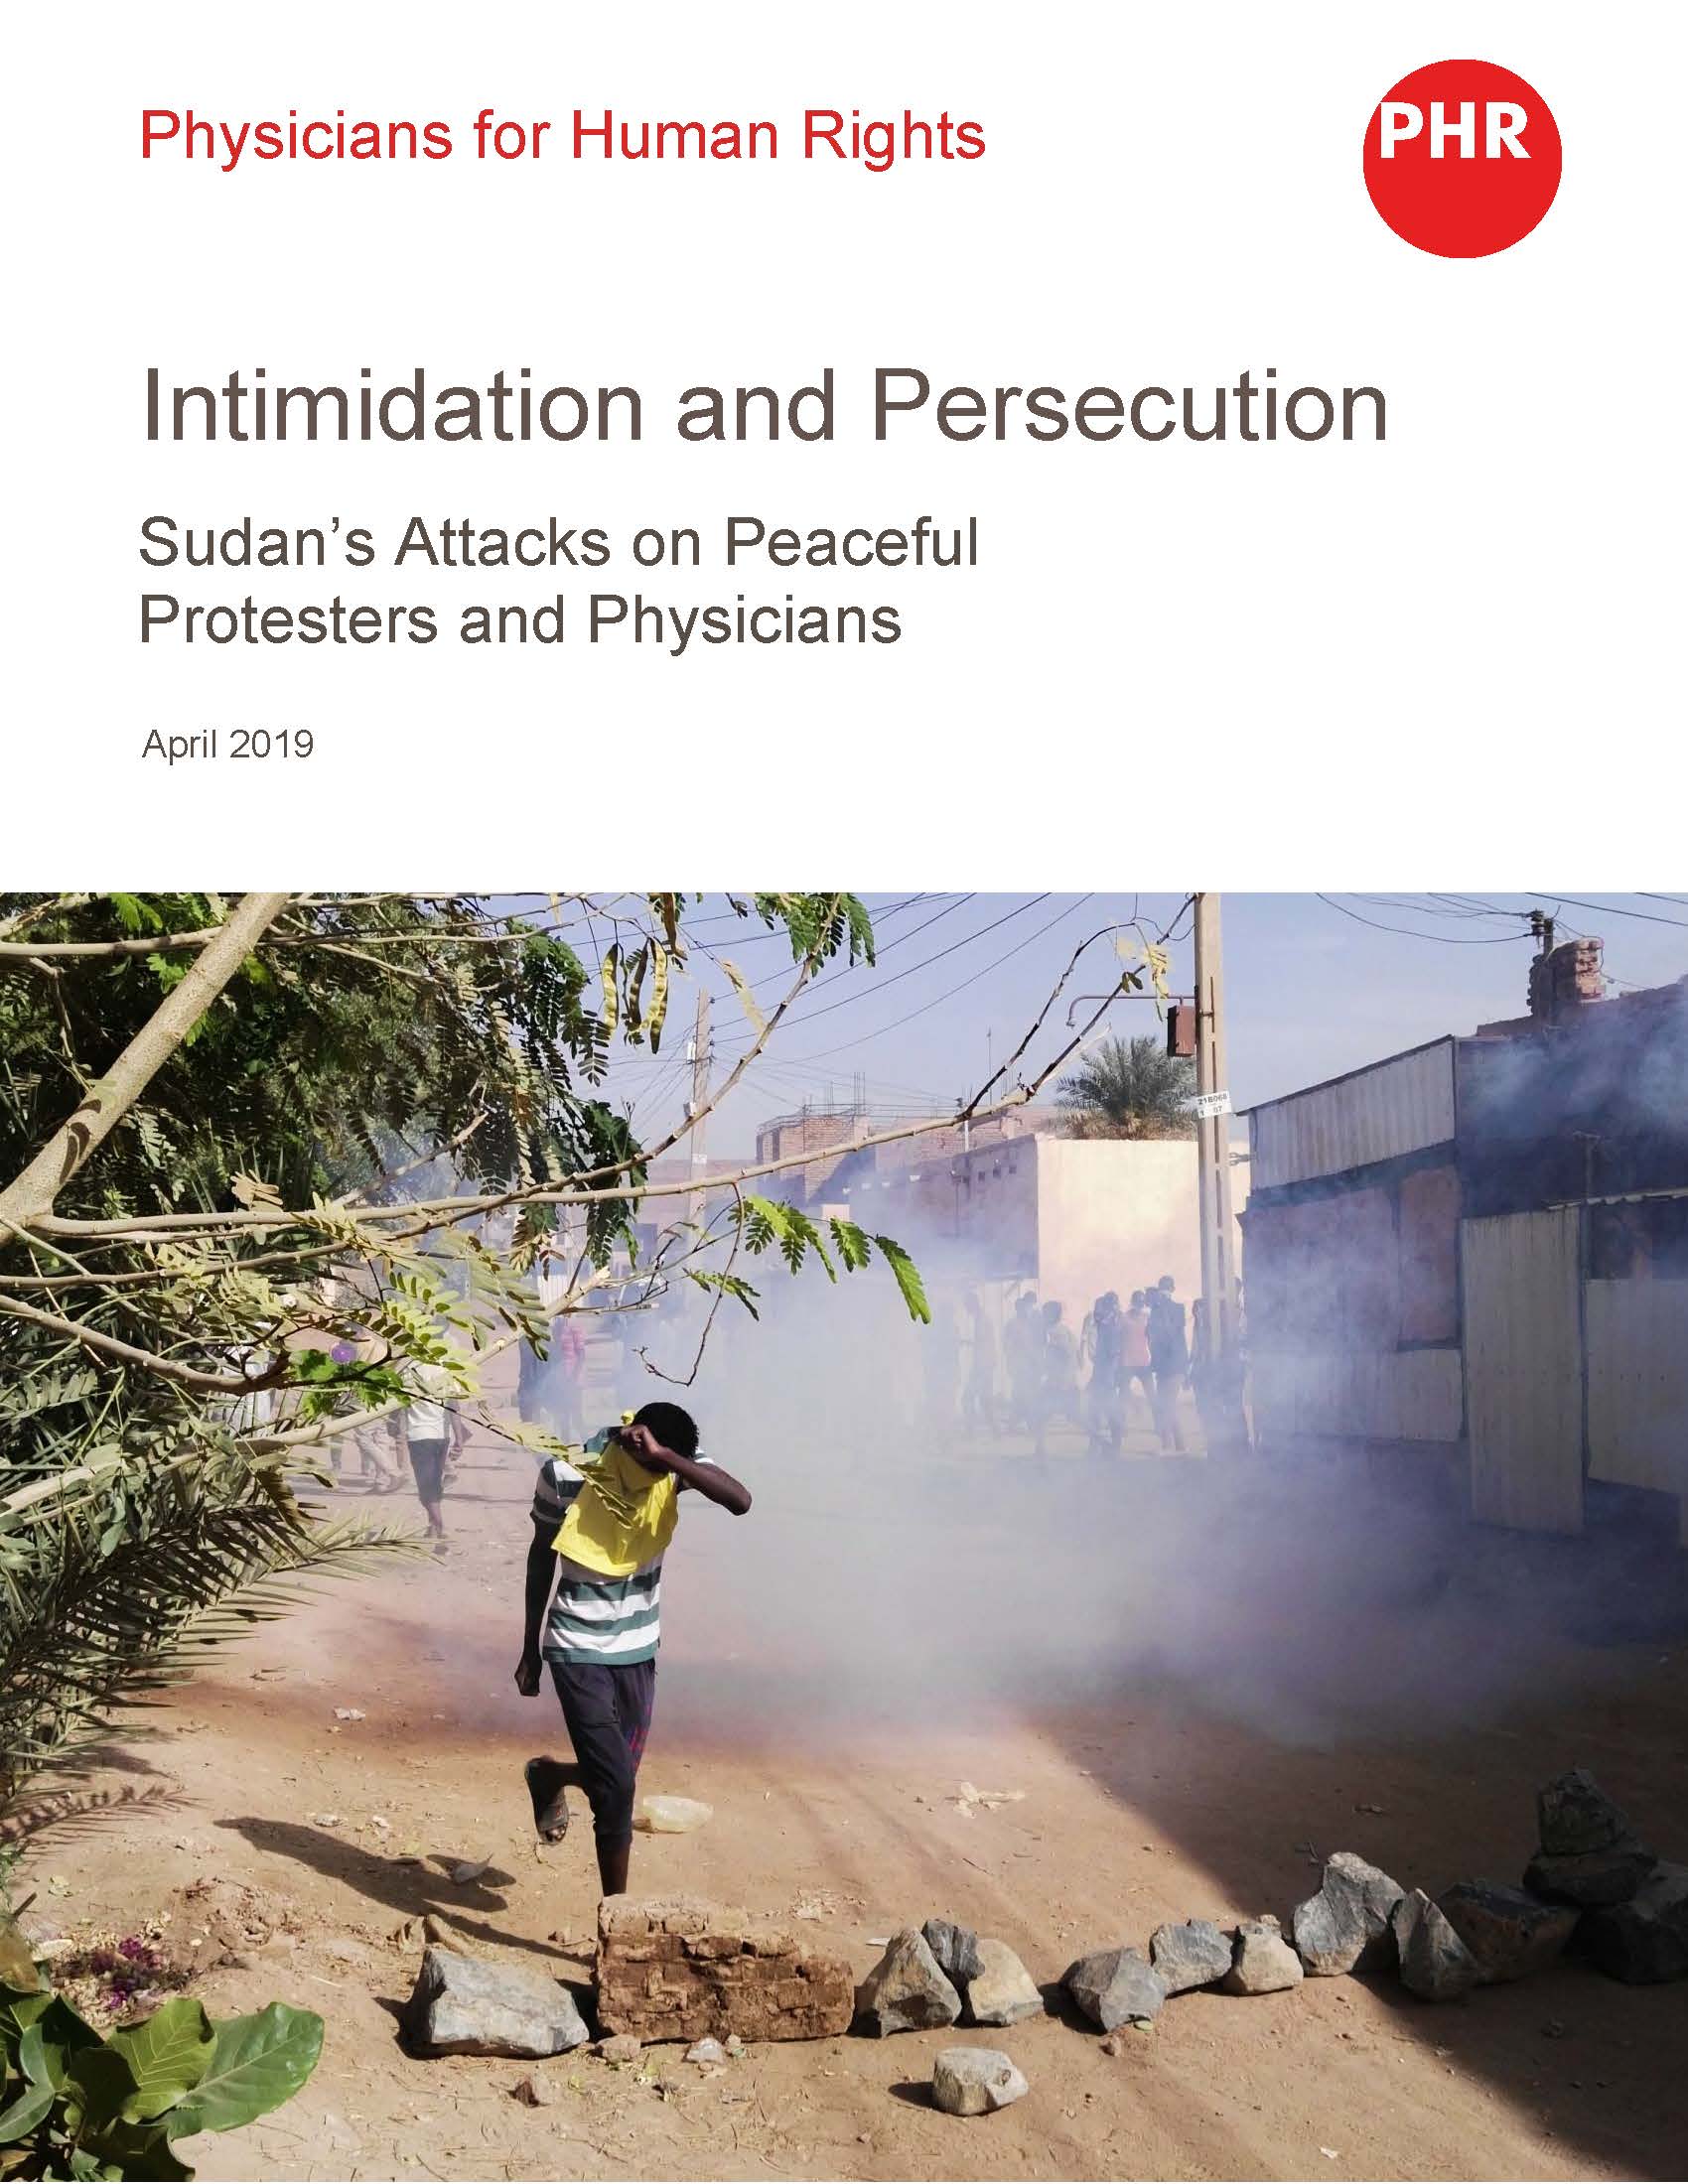 Intimidation and Persecution: Sudan’s Attacks on Peaceful Protesters and Physicians